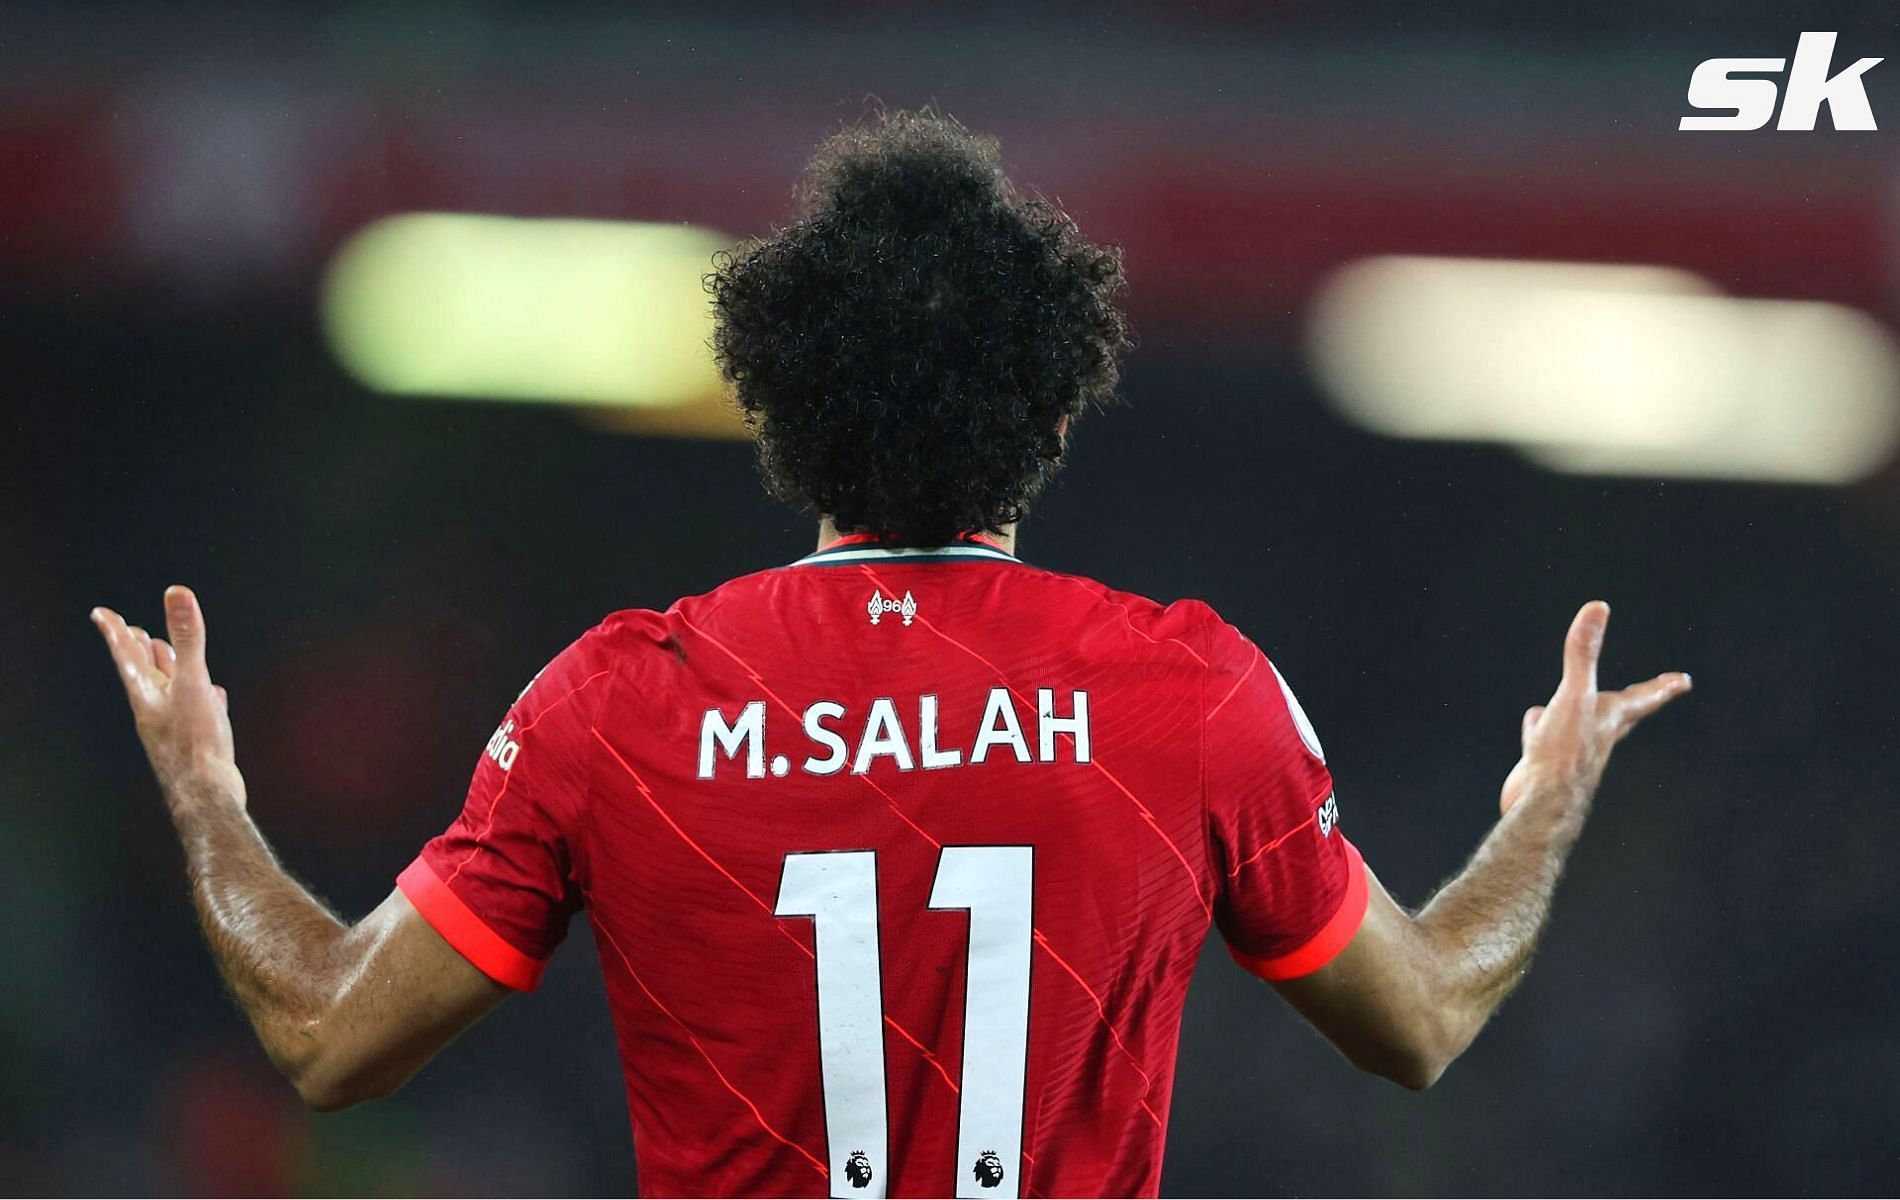 Mo Salah has elevated the importance of the Liverpool No.11 jersey